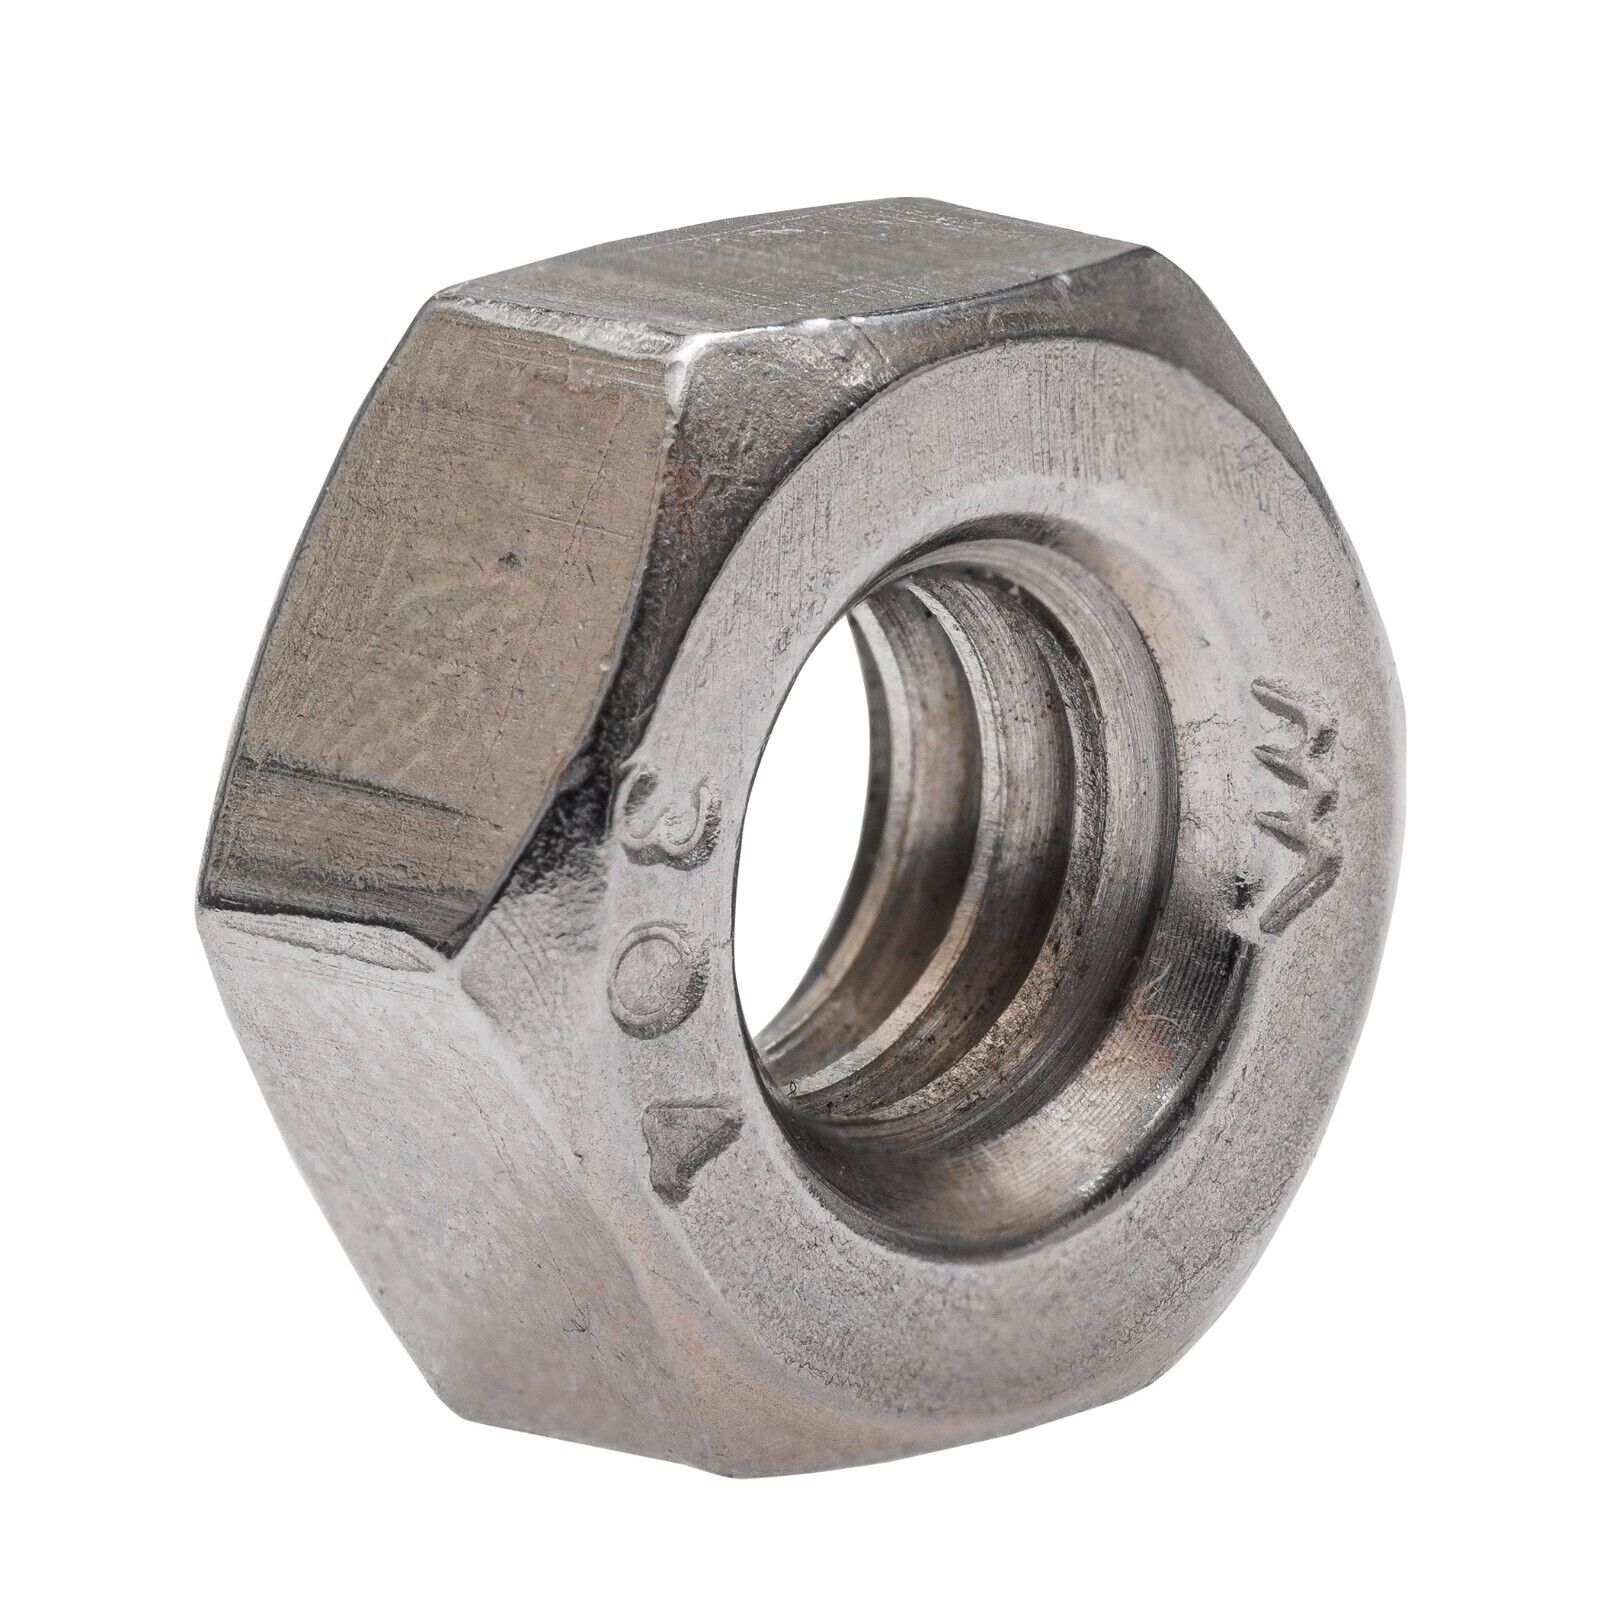 1/4-20 Hex Nuts in Stainless Steel 304 - Multiple Pack Sizes Available